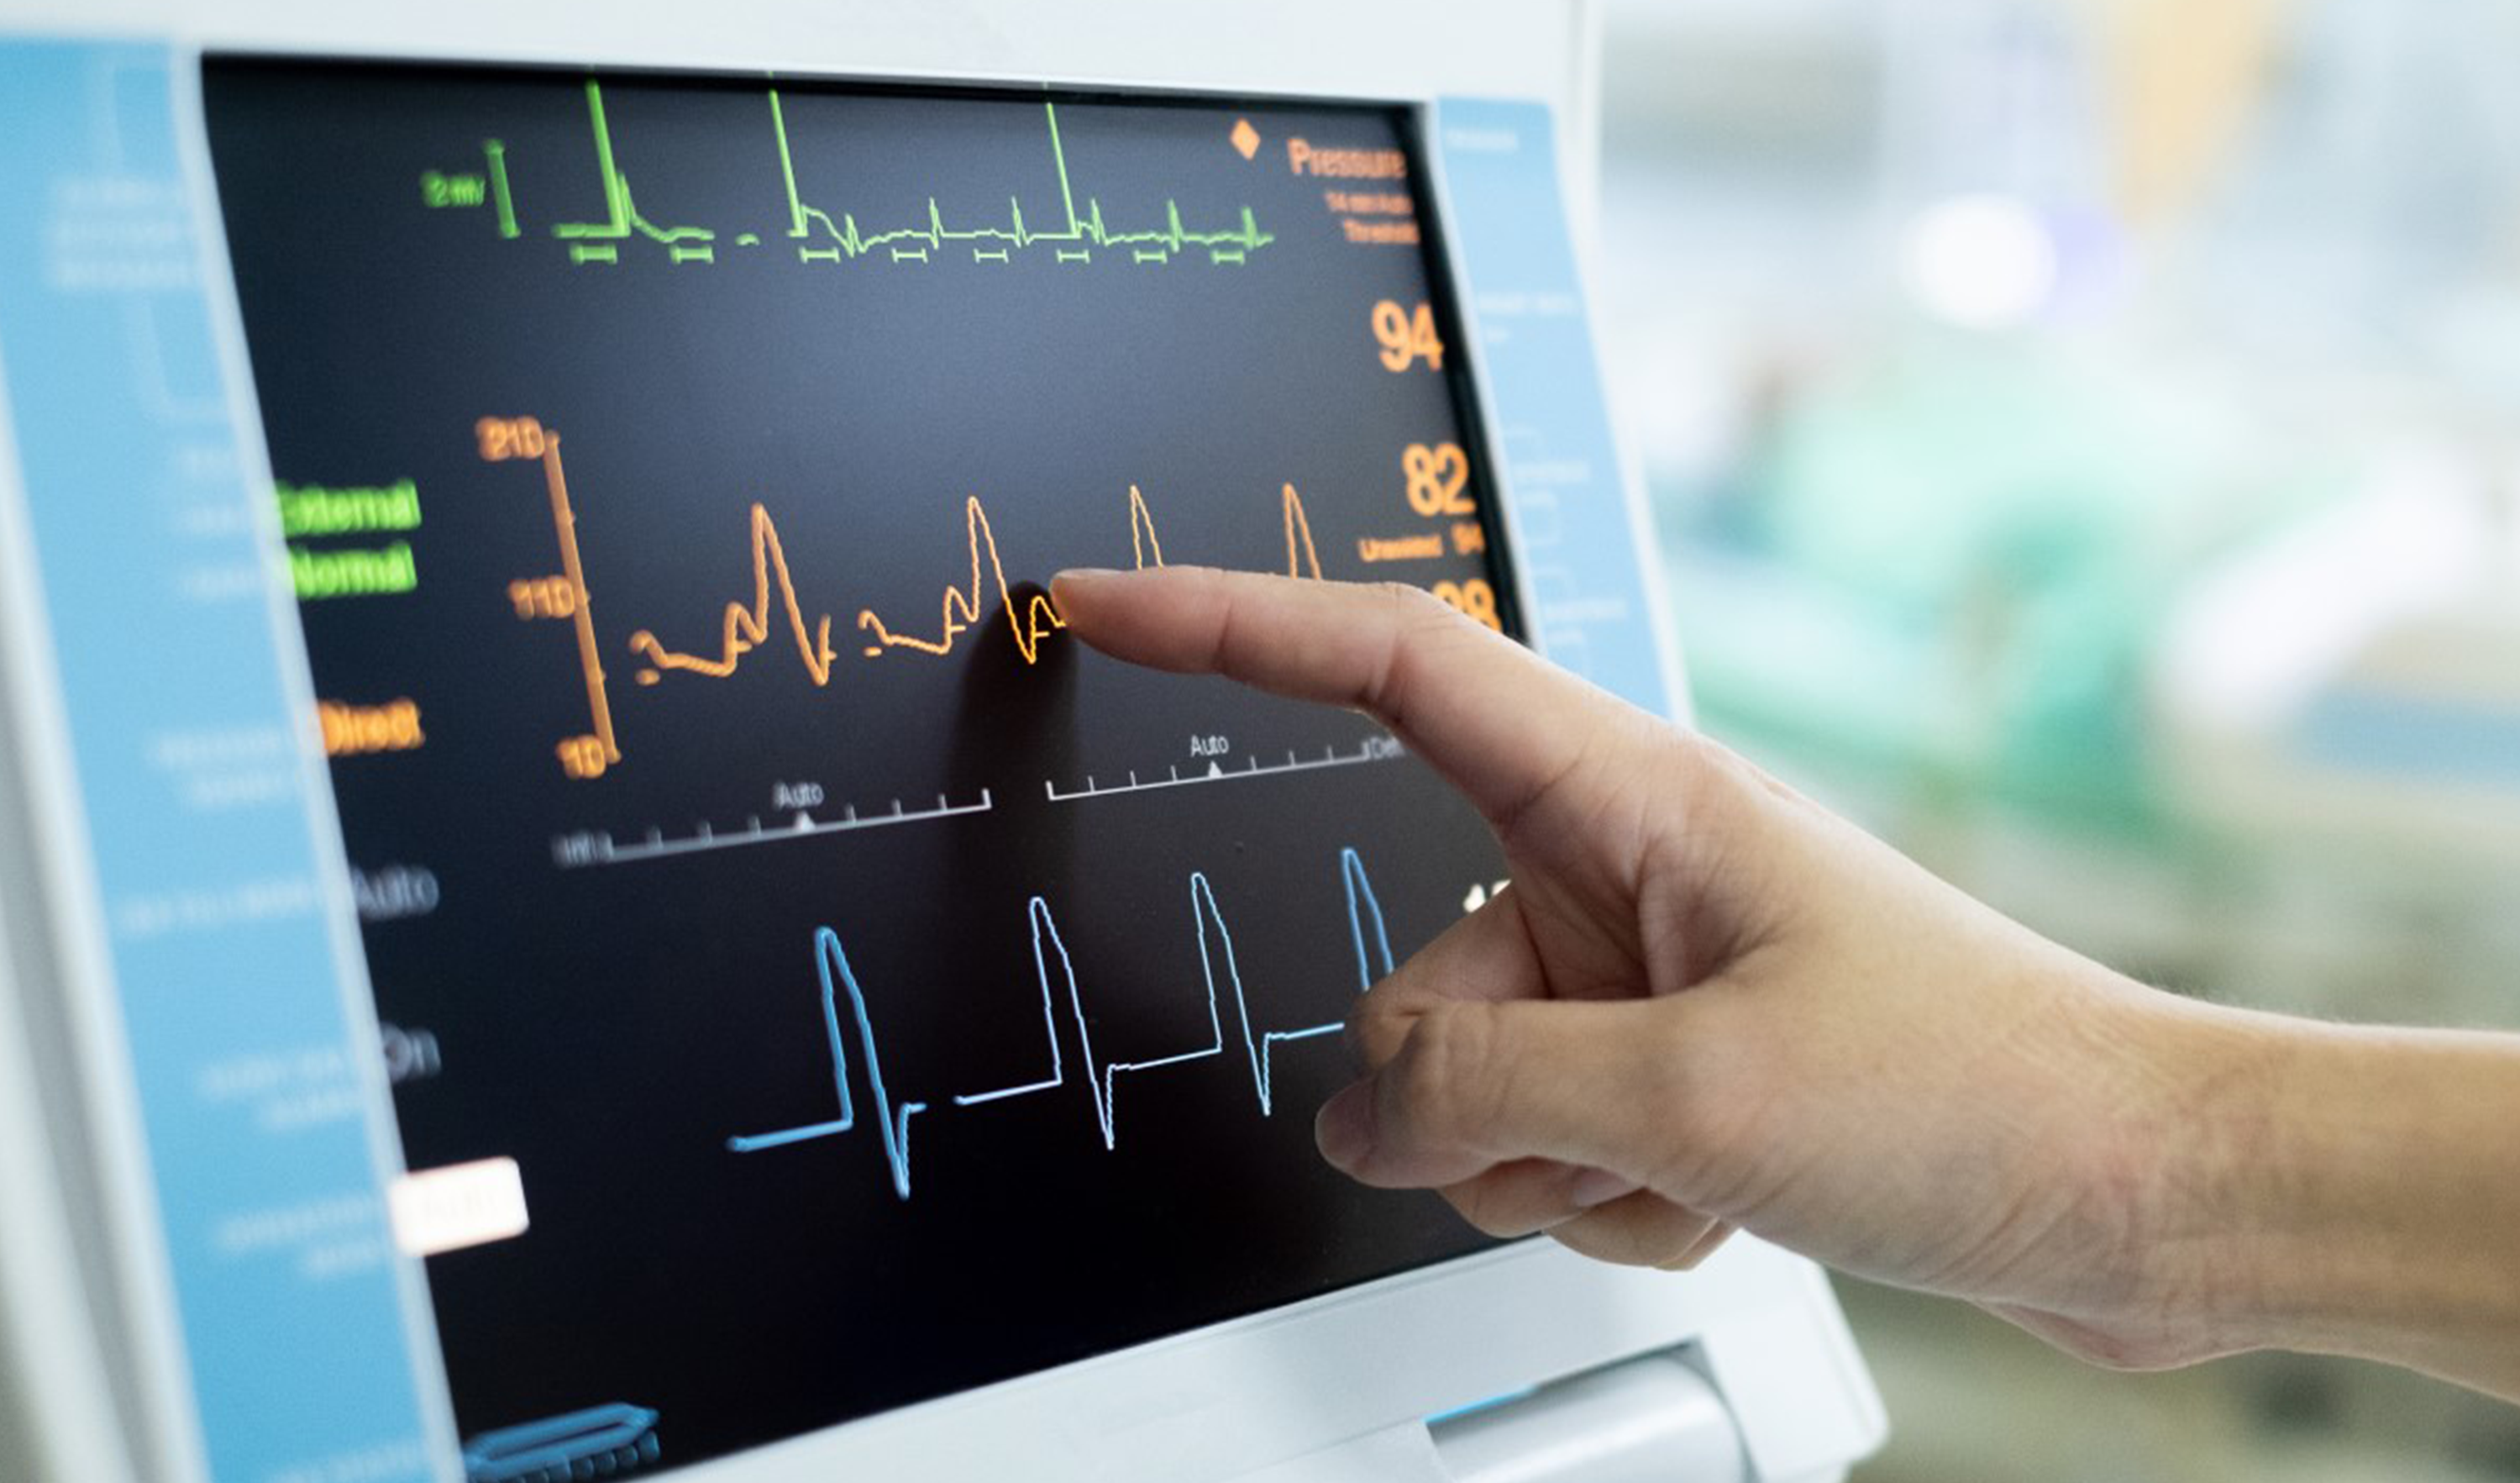 A hand points to heart monitor screen